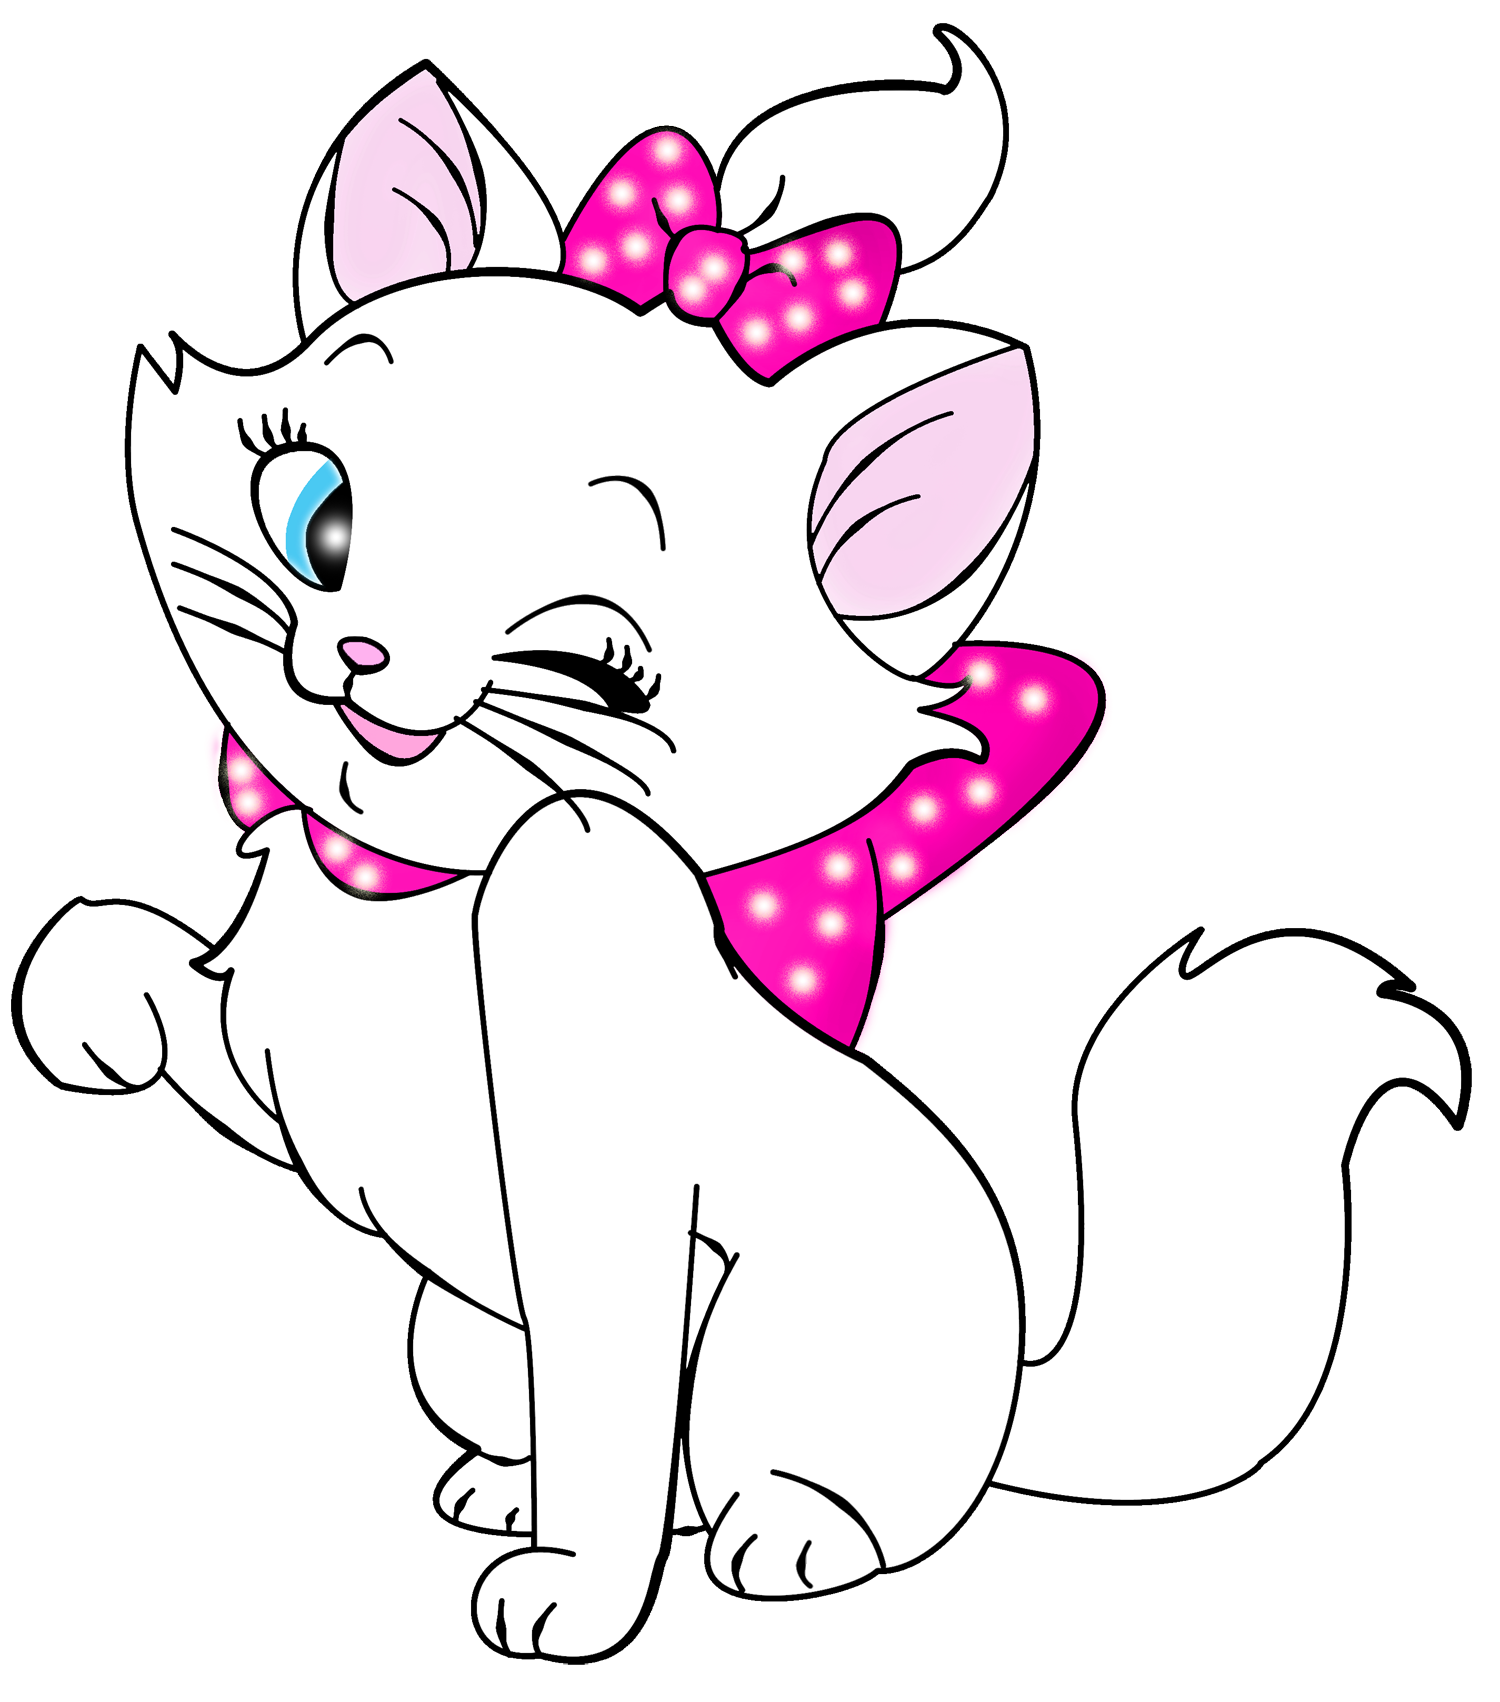 Kitten Cat Marie Clip art - White Kitten Cartoon Free Clipart png download  - 1500*1702 - Free Transparent png Download. - Clip Art Library